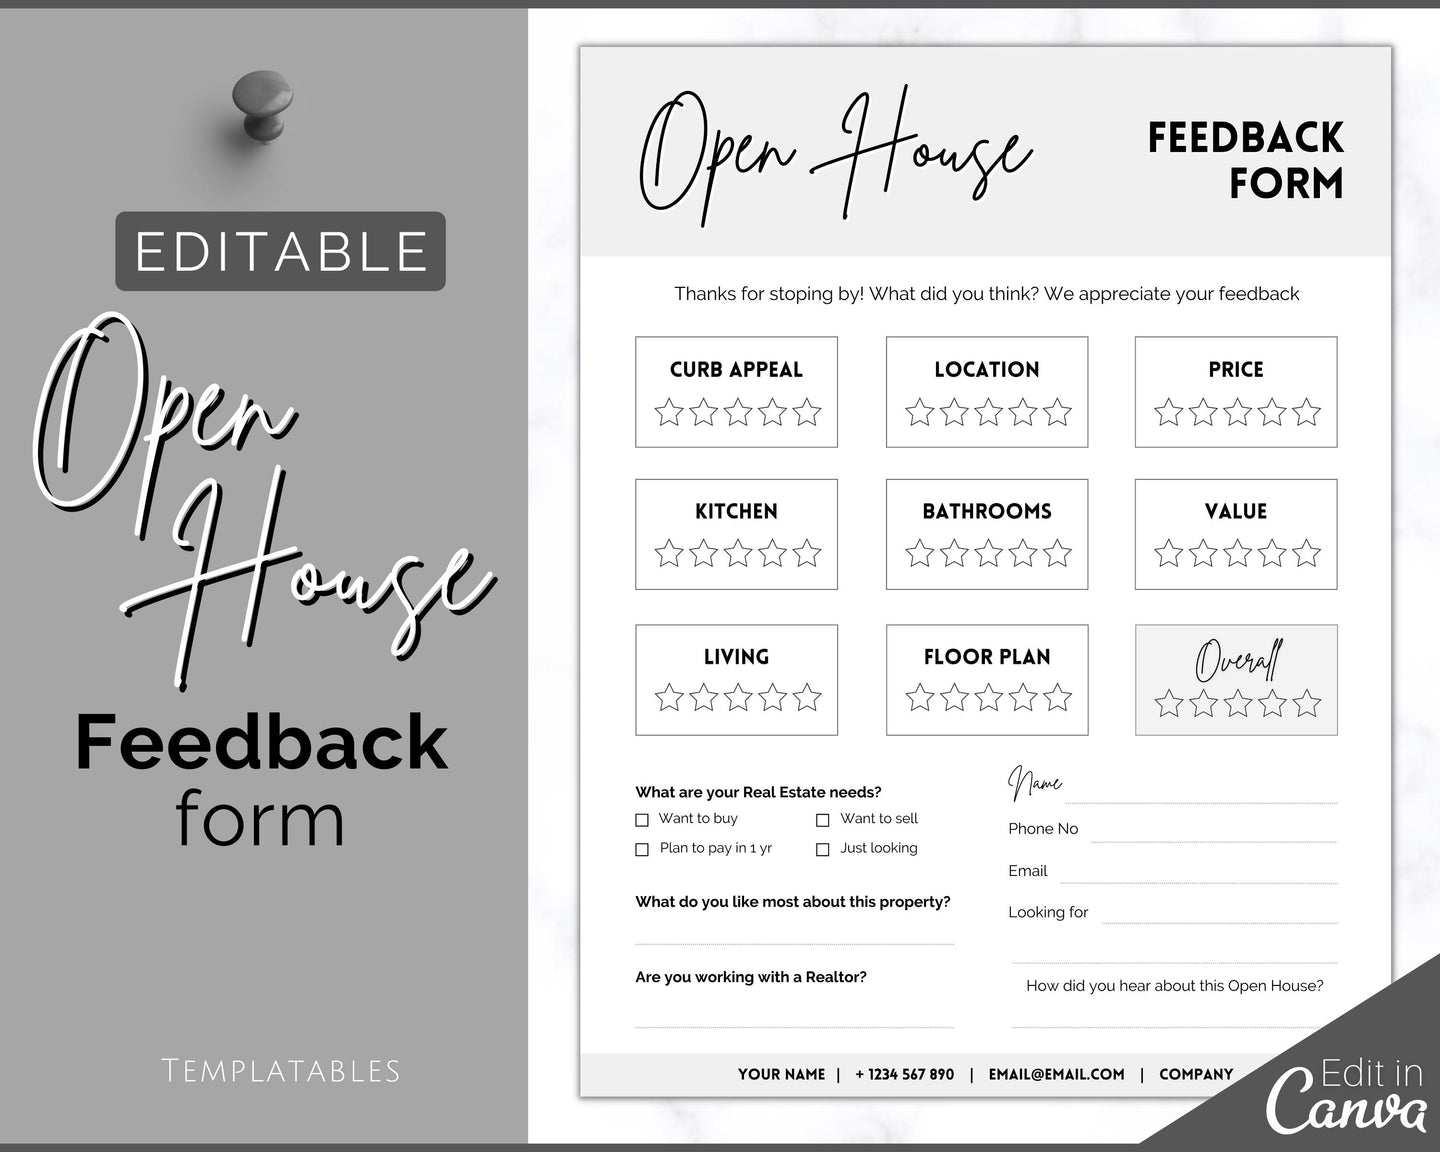 EDITABLE Open House Real Estate Feedback Form | Open House template for Realtors & Brokers